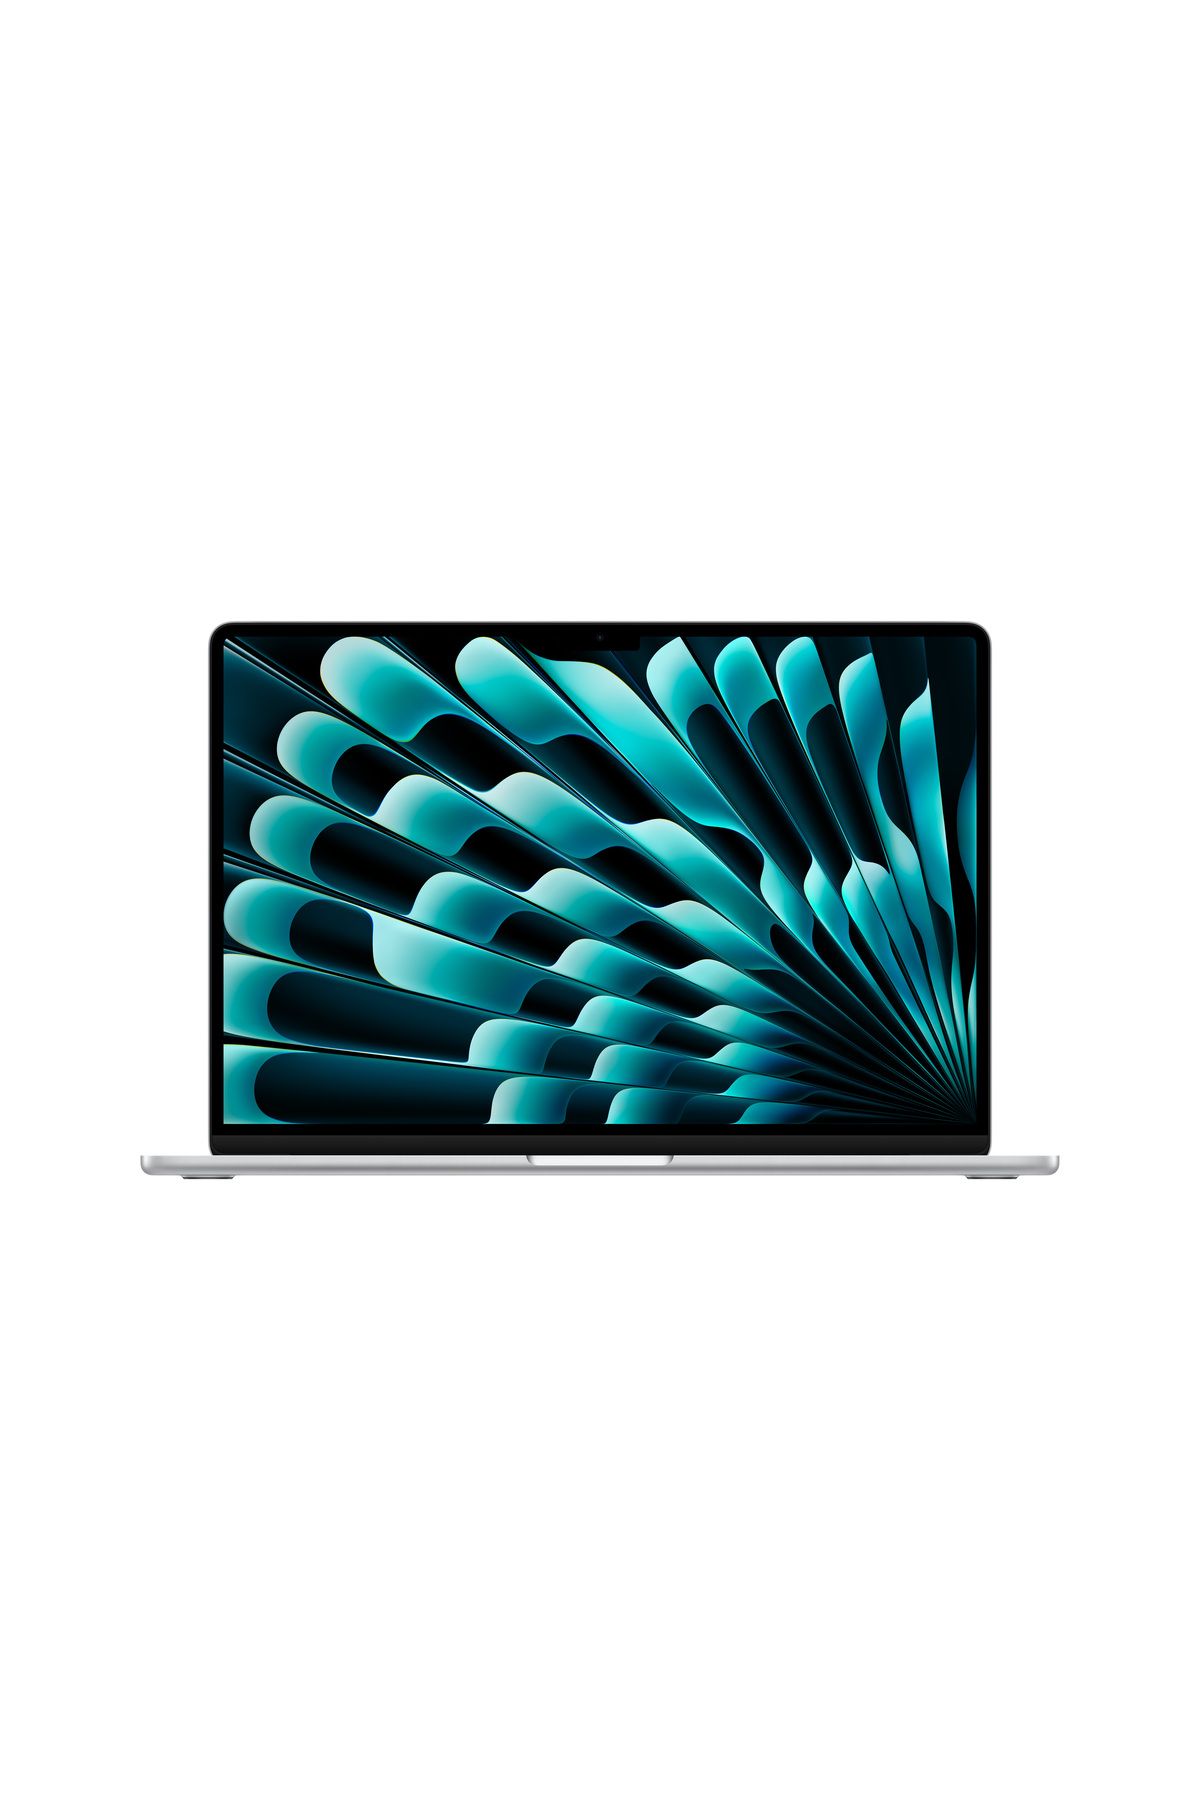 Apple 15-inch MacBook Air: Apple M3 chip with 8-core CPU and 10-core GPU, 8GB, 256GB SSD - Silver